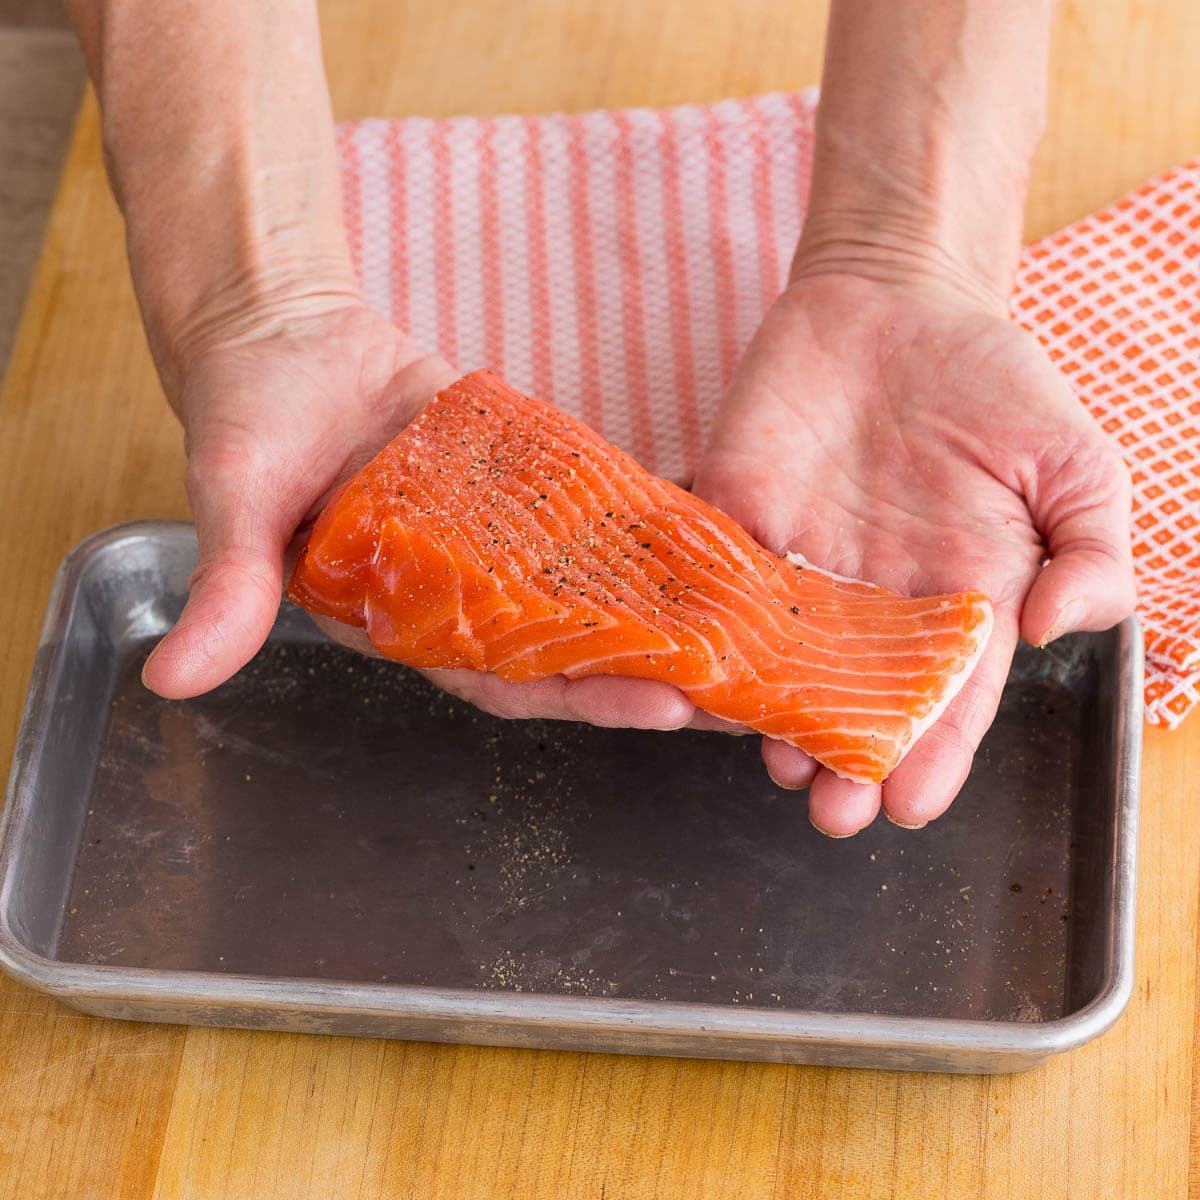 Piece of raw salmon, uneven in thickness with a thicker and thinner end.